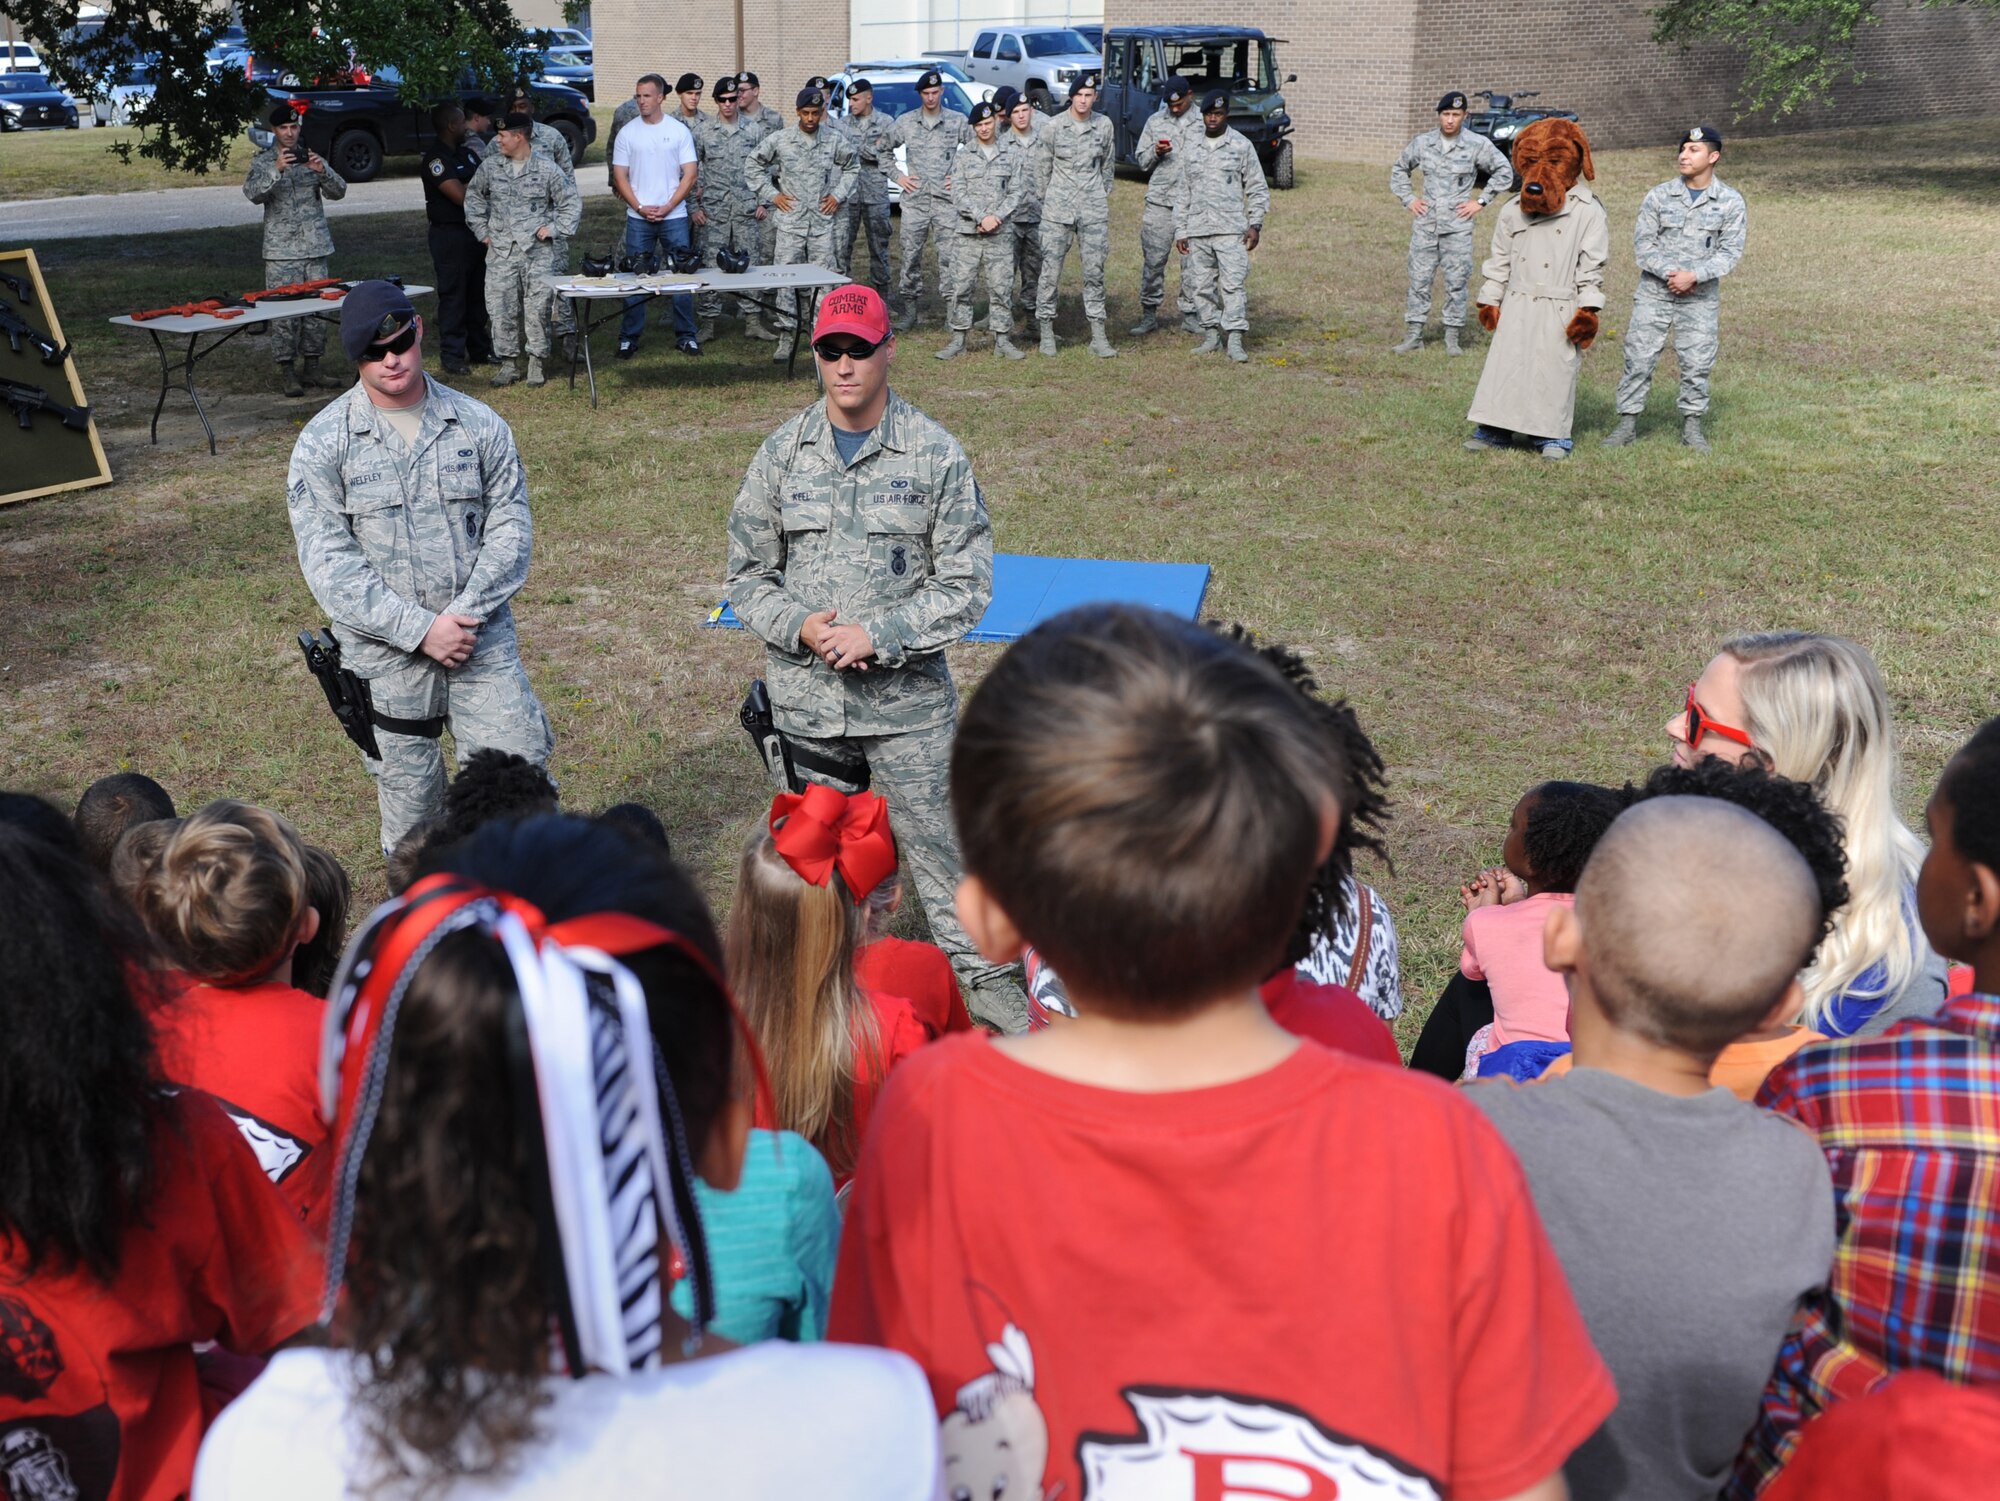 Staff Sgt. Matthew Keel, 81st Security Forces Squadron combat arms instructor, briefs Jeff Davis Elementary School first graders during a field trip Oct. 28, 2016, on Keesler Air Force Base, Miss. The children also toured the Keesler Fire Department where they received a demonstration on the proper wear of firefighter bunker gear and fire prevention safety information. (U.S. Air Force photo by Kemberly Groue/Released)